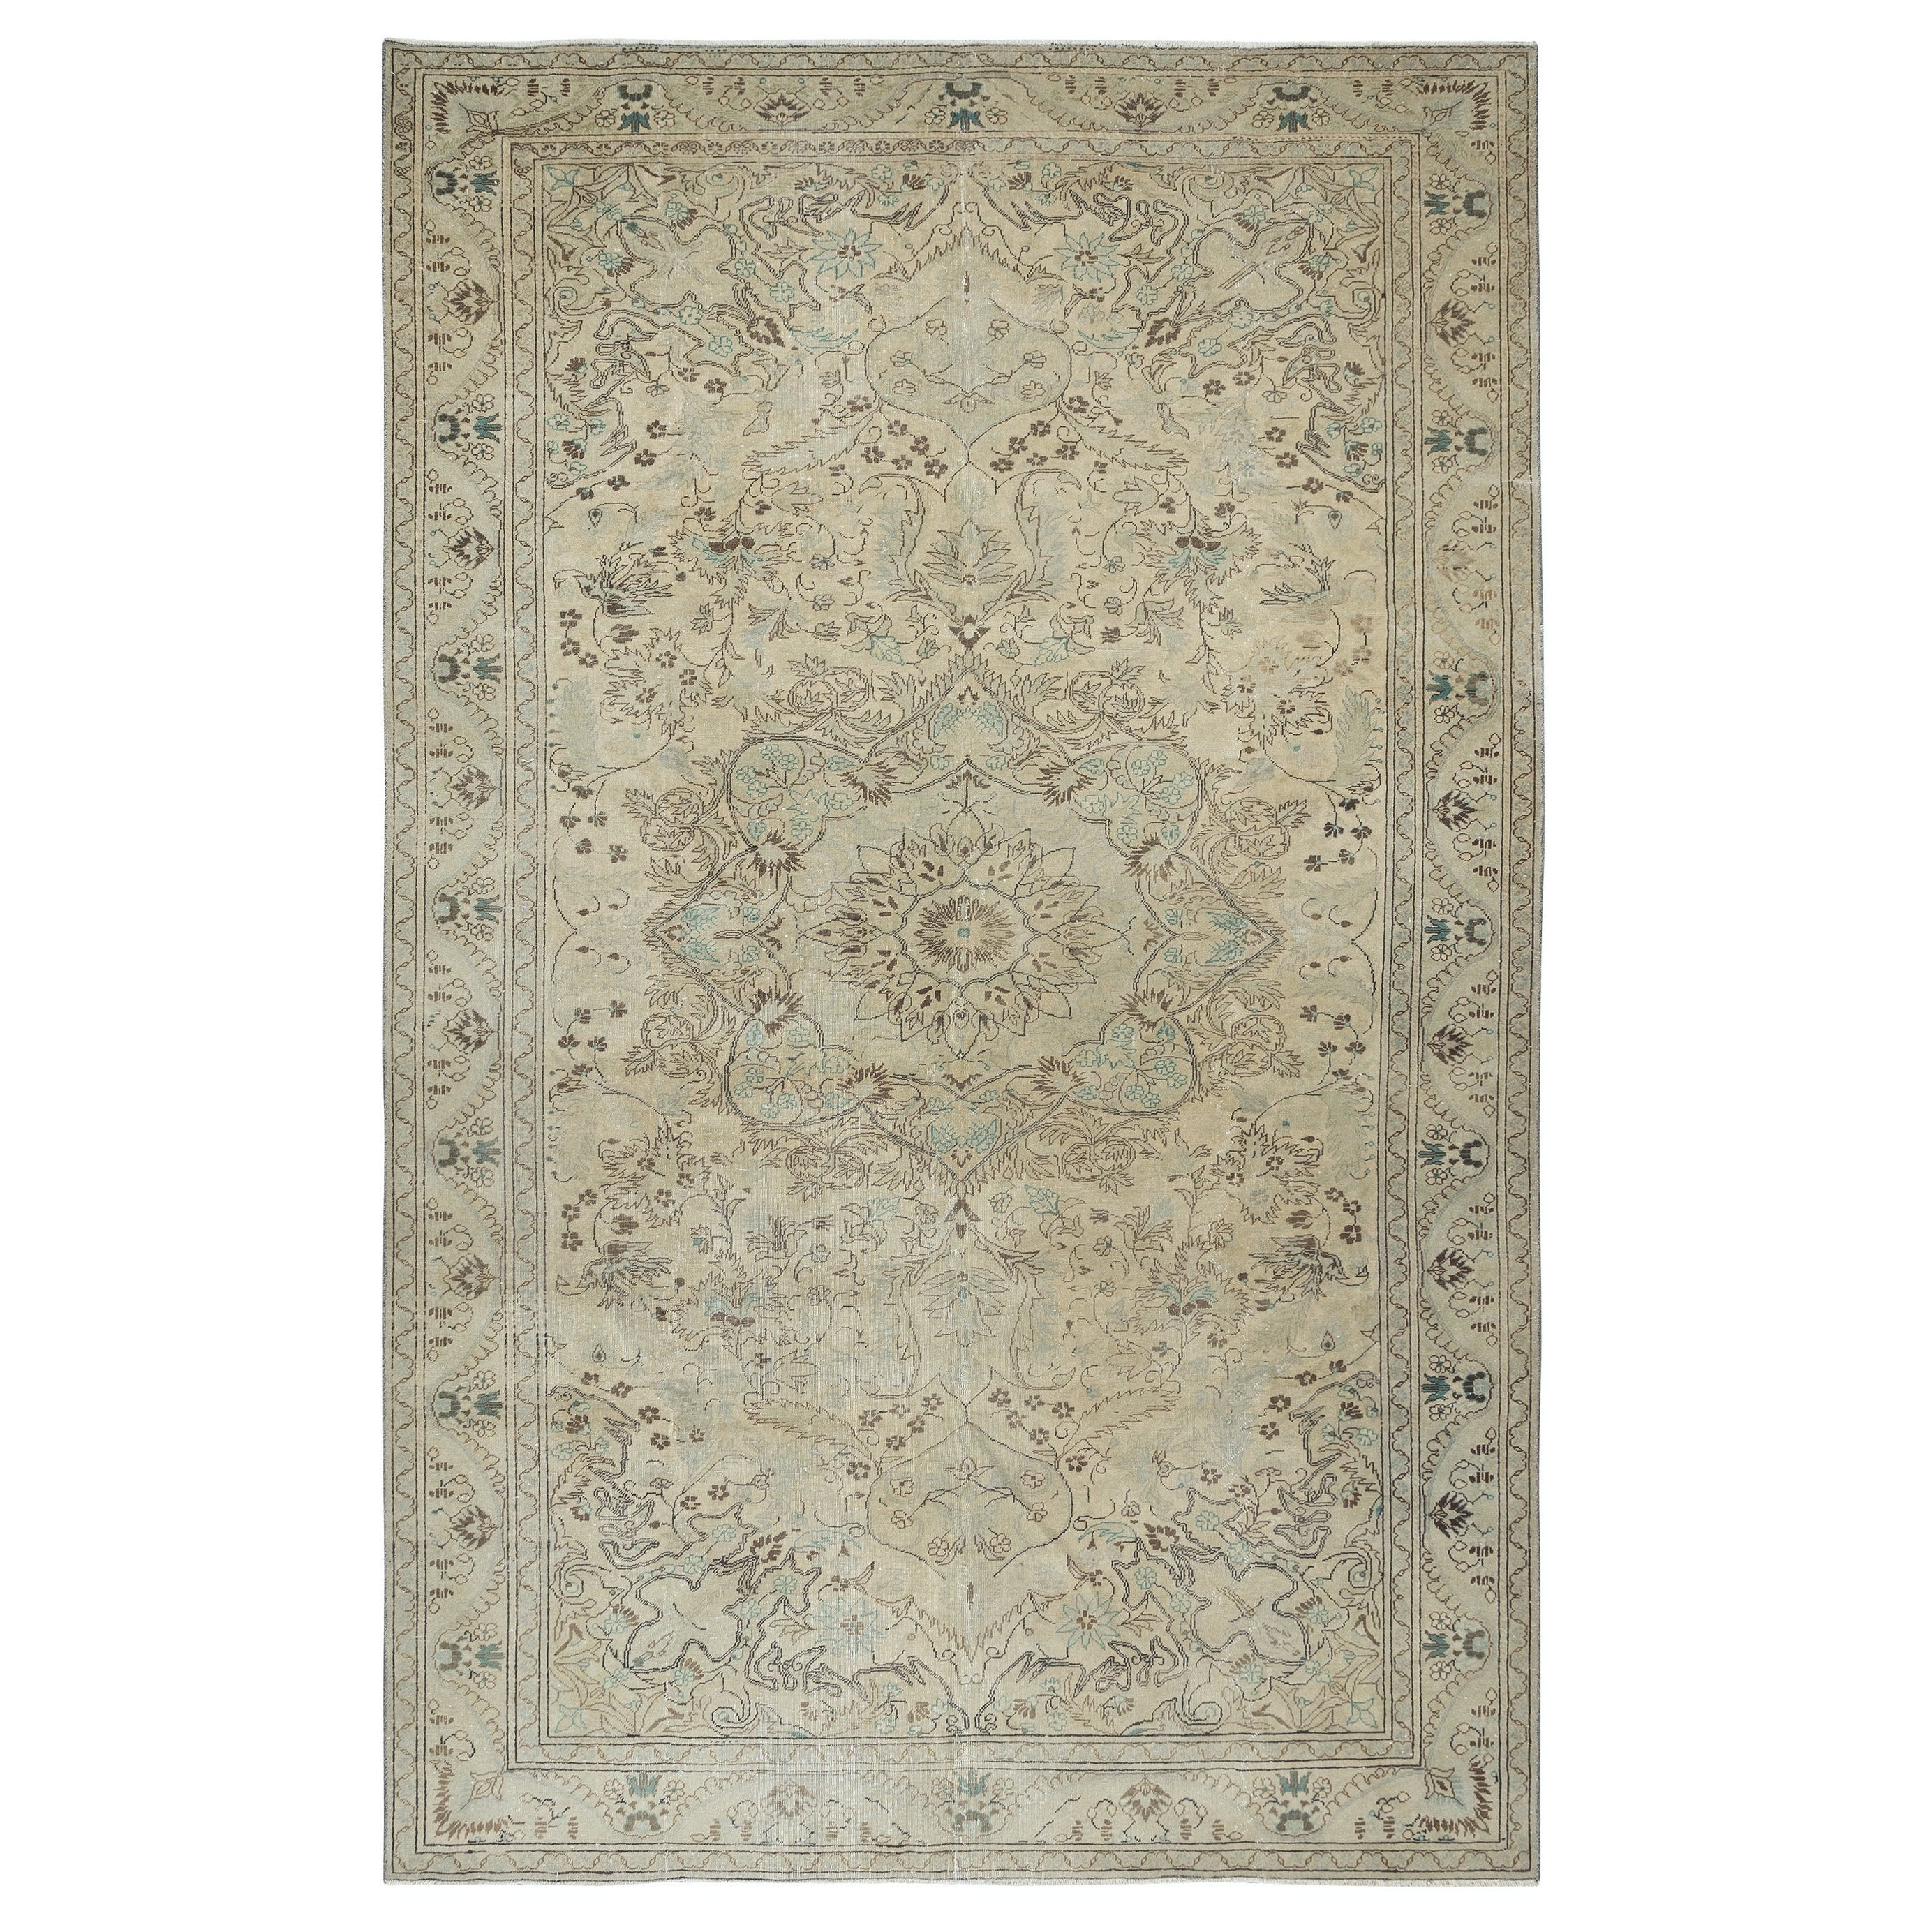 6.6x10.6 Ft One-of-a-Kind Vintage Area Rug, Handmade Anatolian Carpet in Beige For Sale